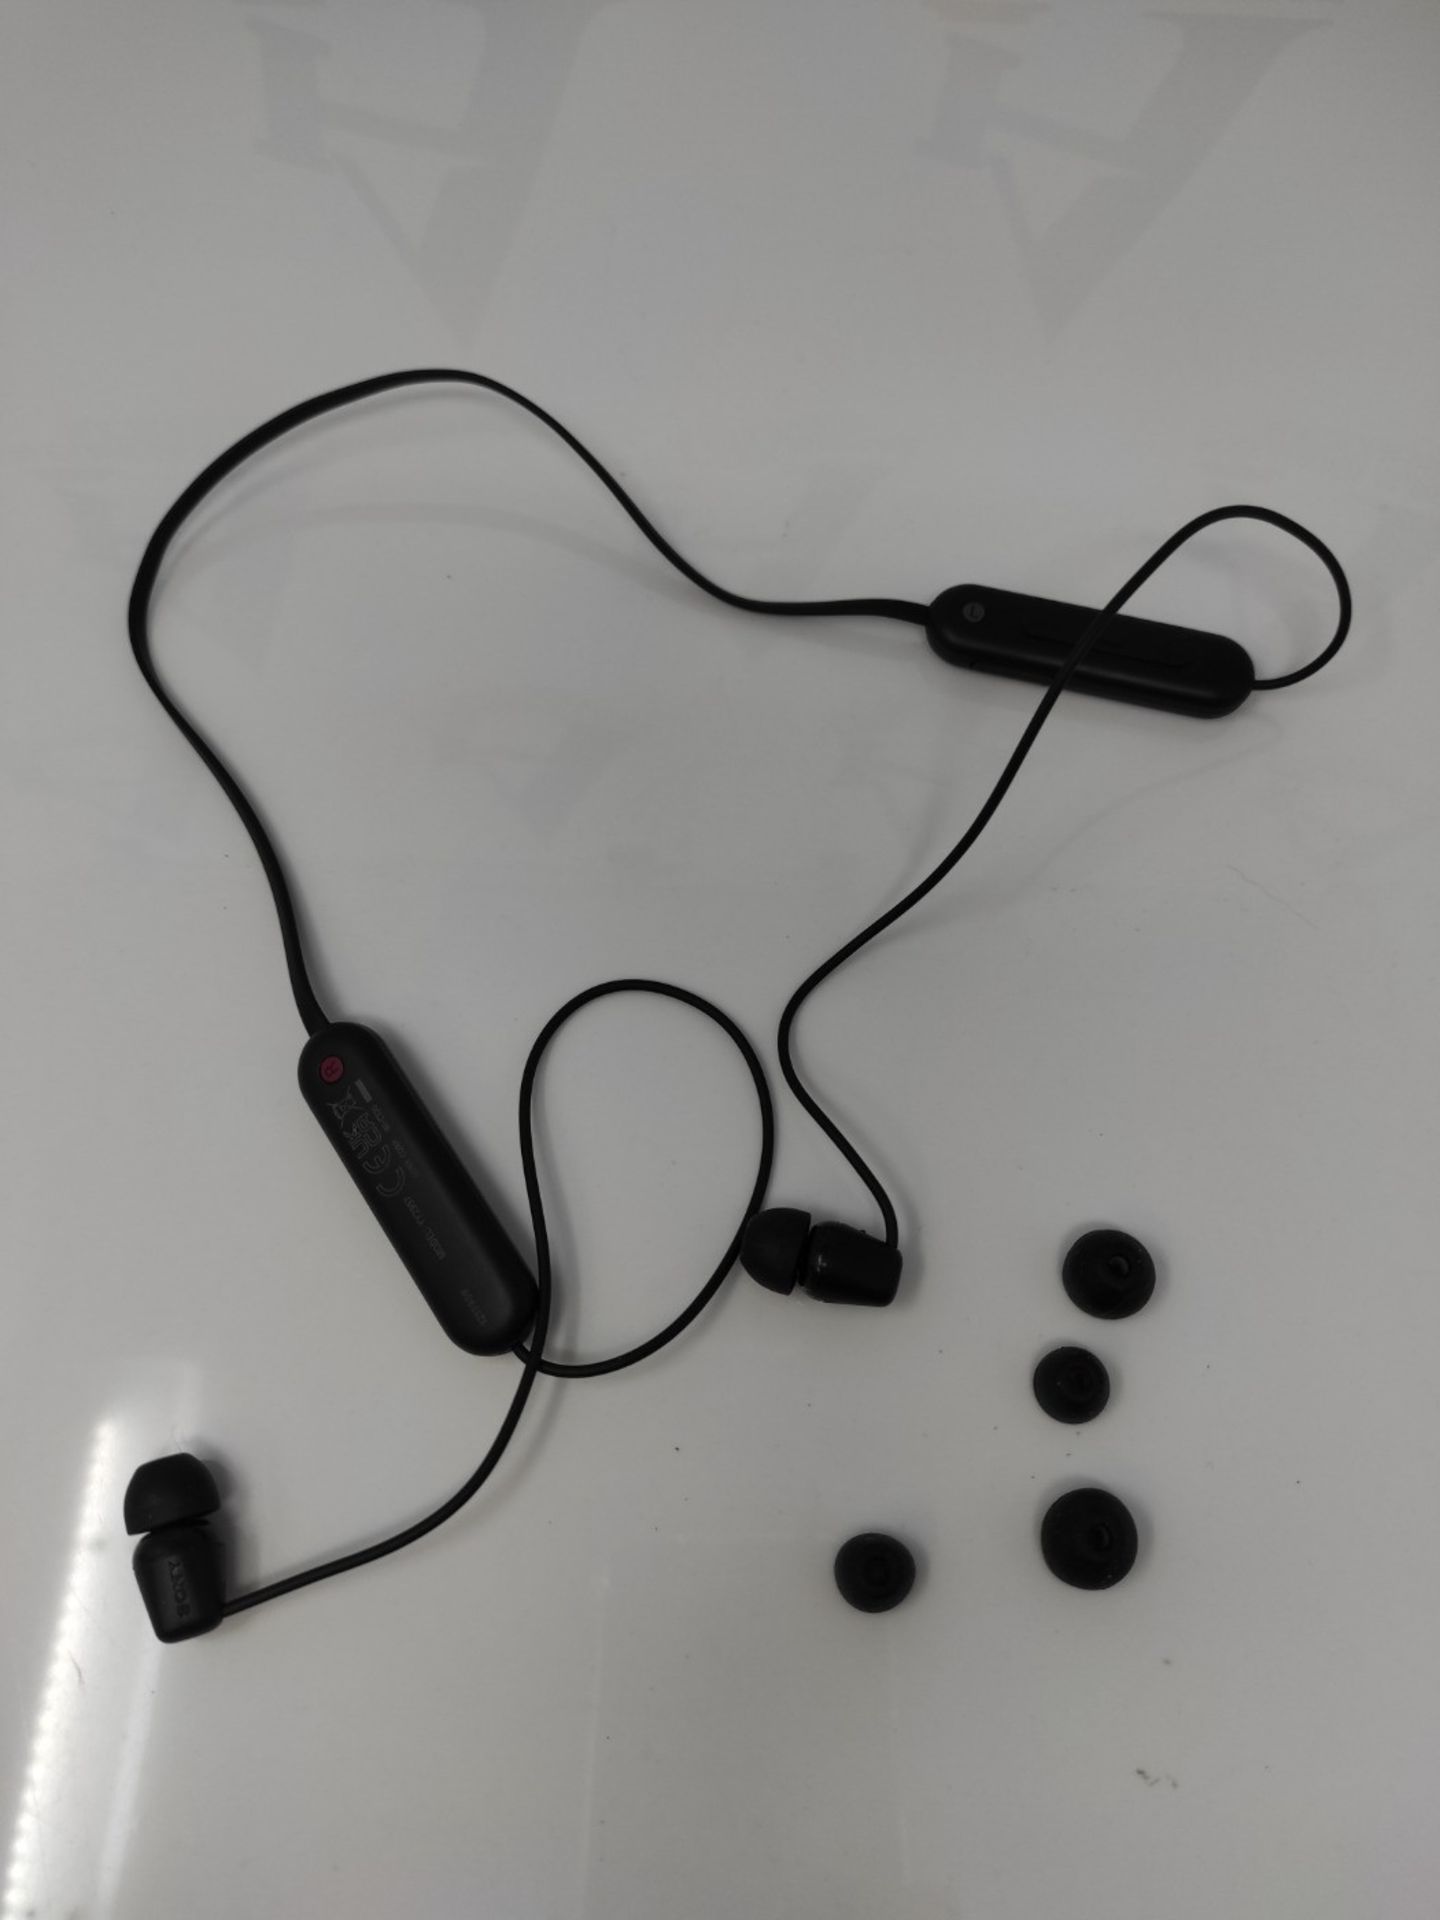 Sony WI-C100 Wireless In-ear Headphones - Up to 25 hours of battery life - Water resis - Image 2 of 2